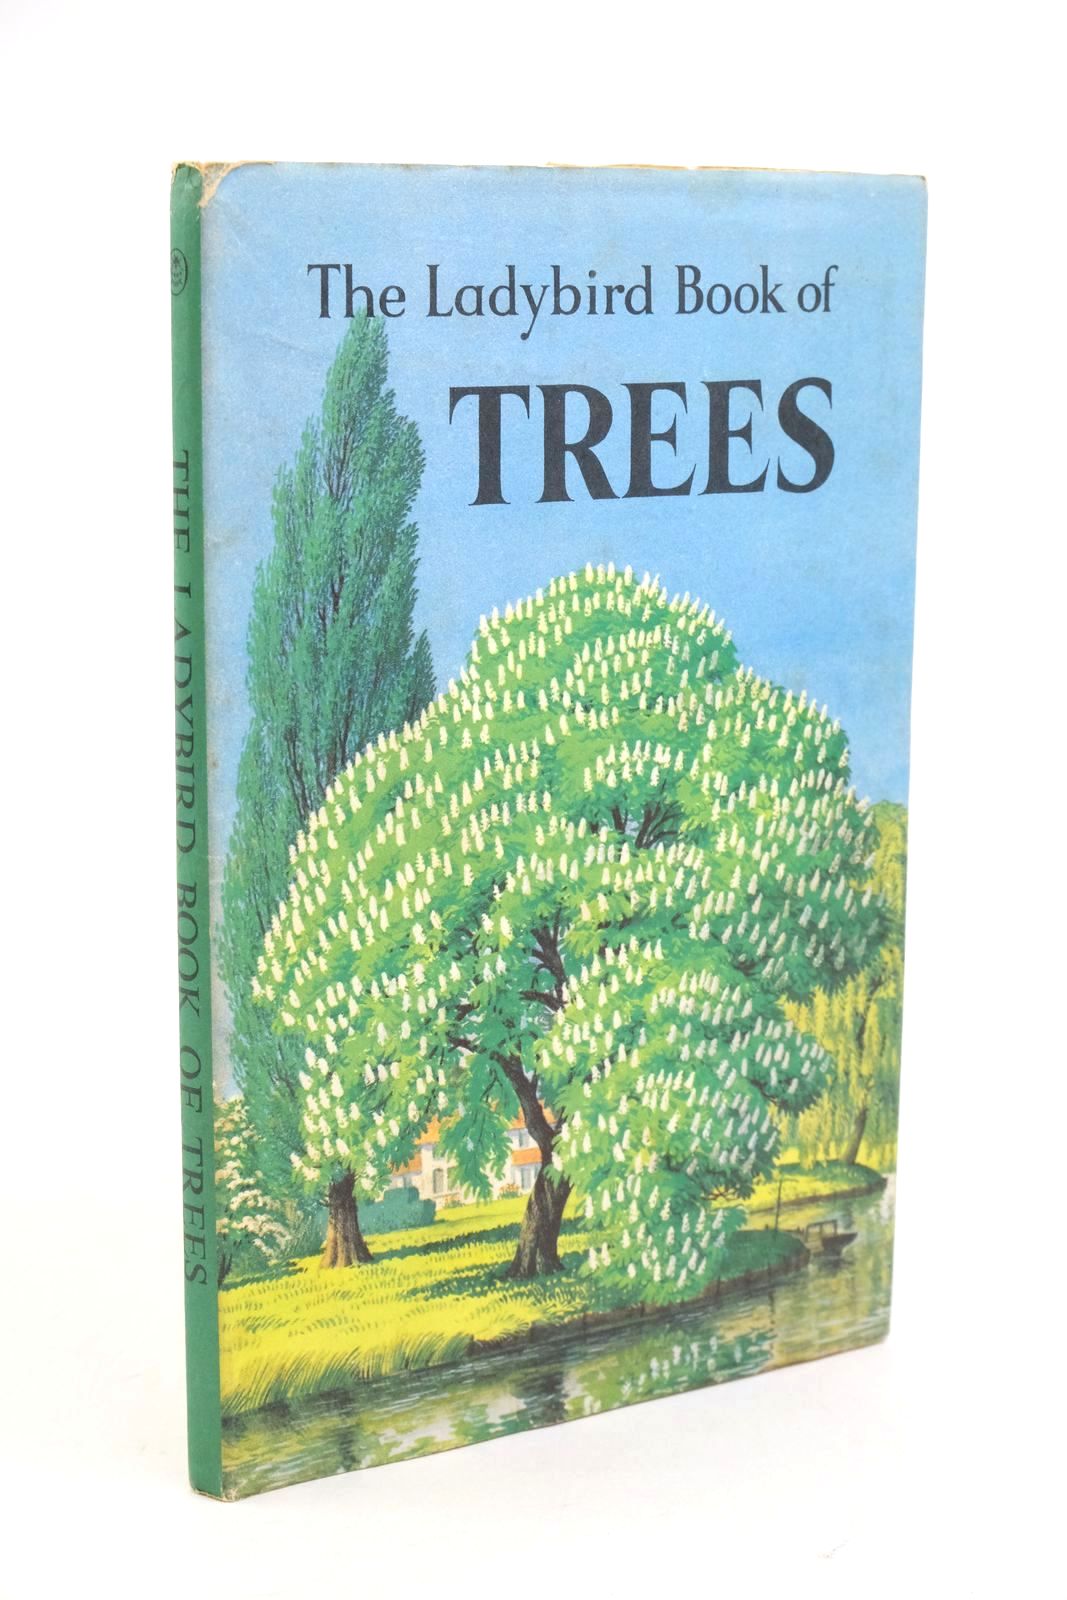 Photo of THE LADYBIRD BOOK OF TREES written by Vesey-Fitzgerald, Brian illustrated by Badmin, S.R. published by Wills &amp; Hepworth Ltd. (STOCK CODE: 1322137)  for sale by Stella & Rose's Books